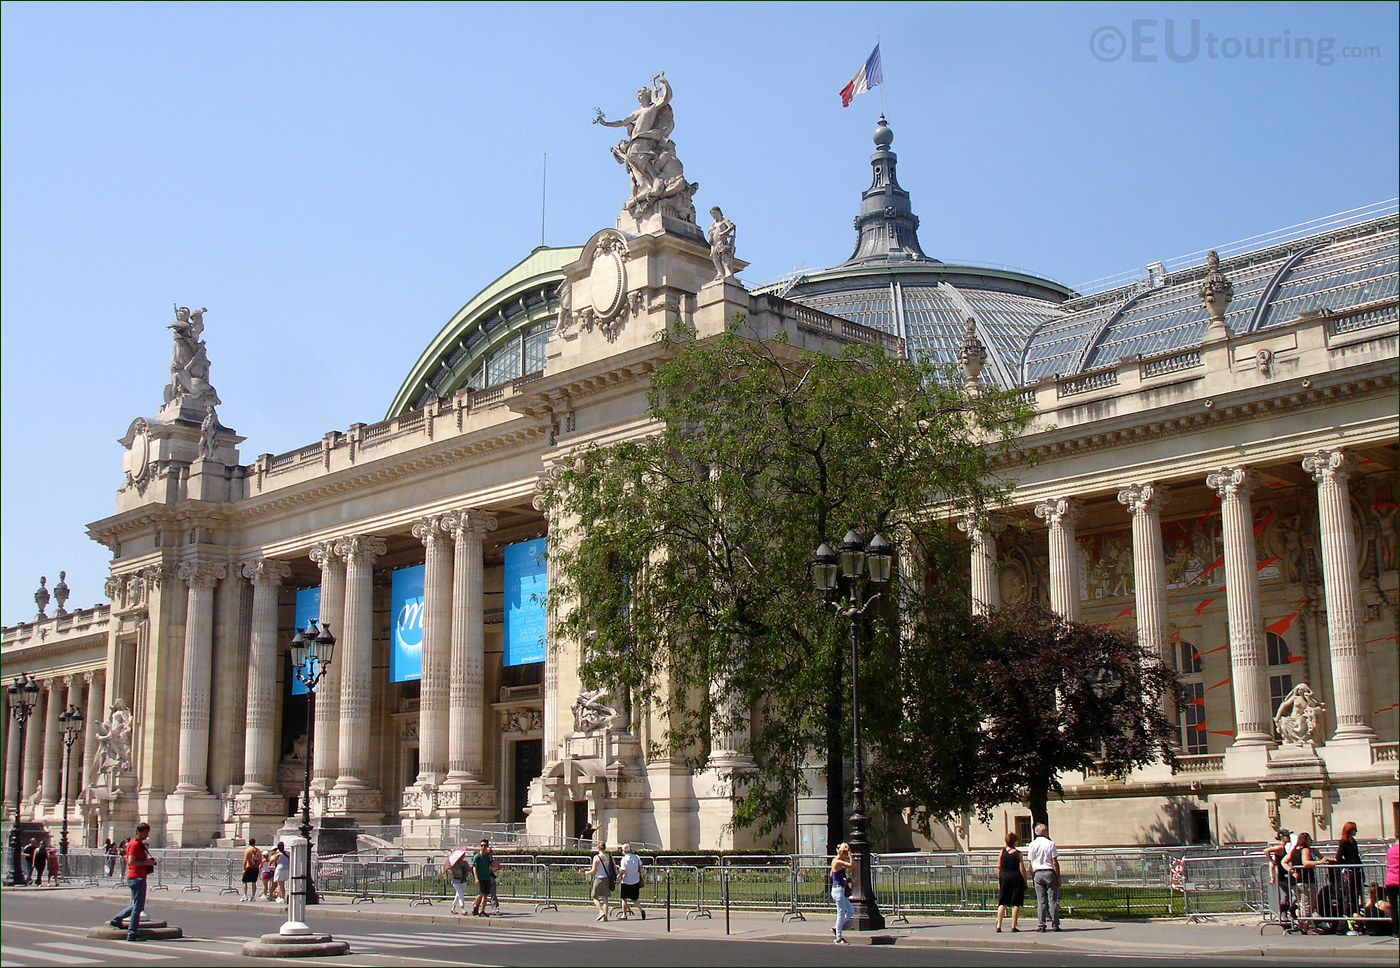 Hd Photos Of The Grand Palais In Paris France Page 1